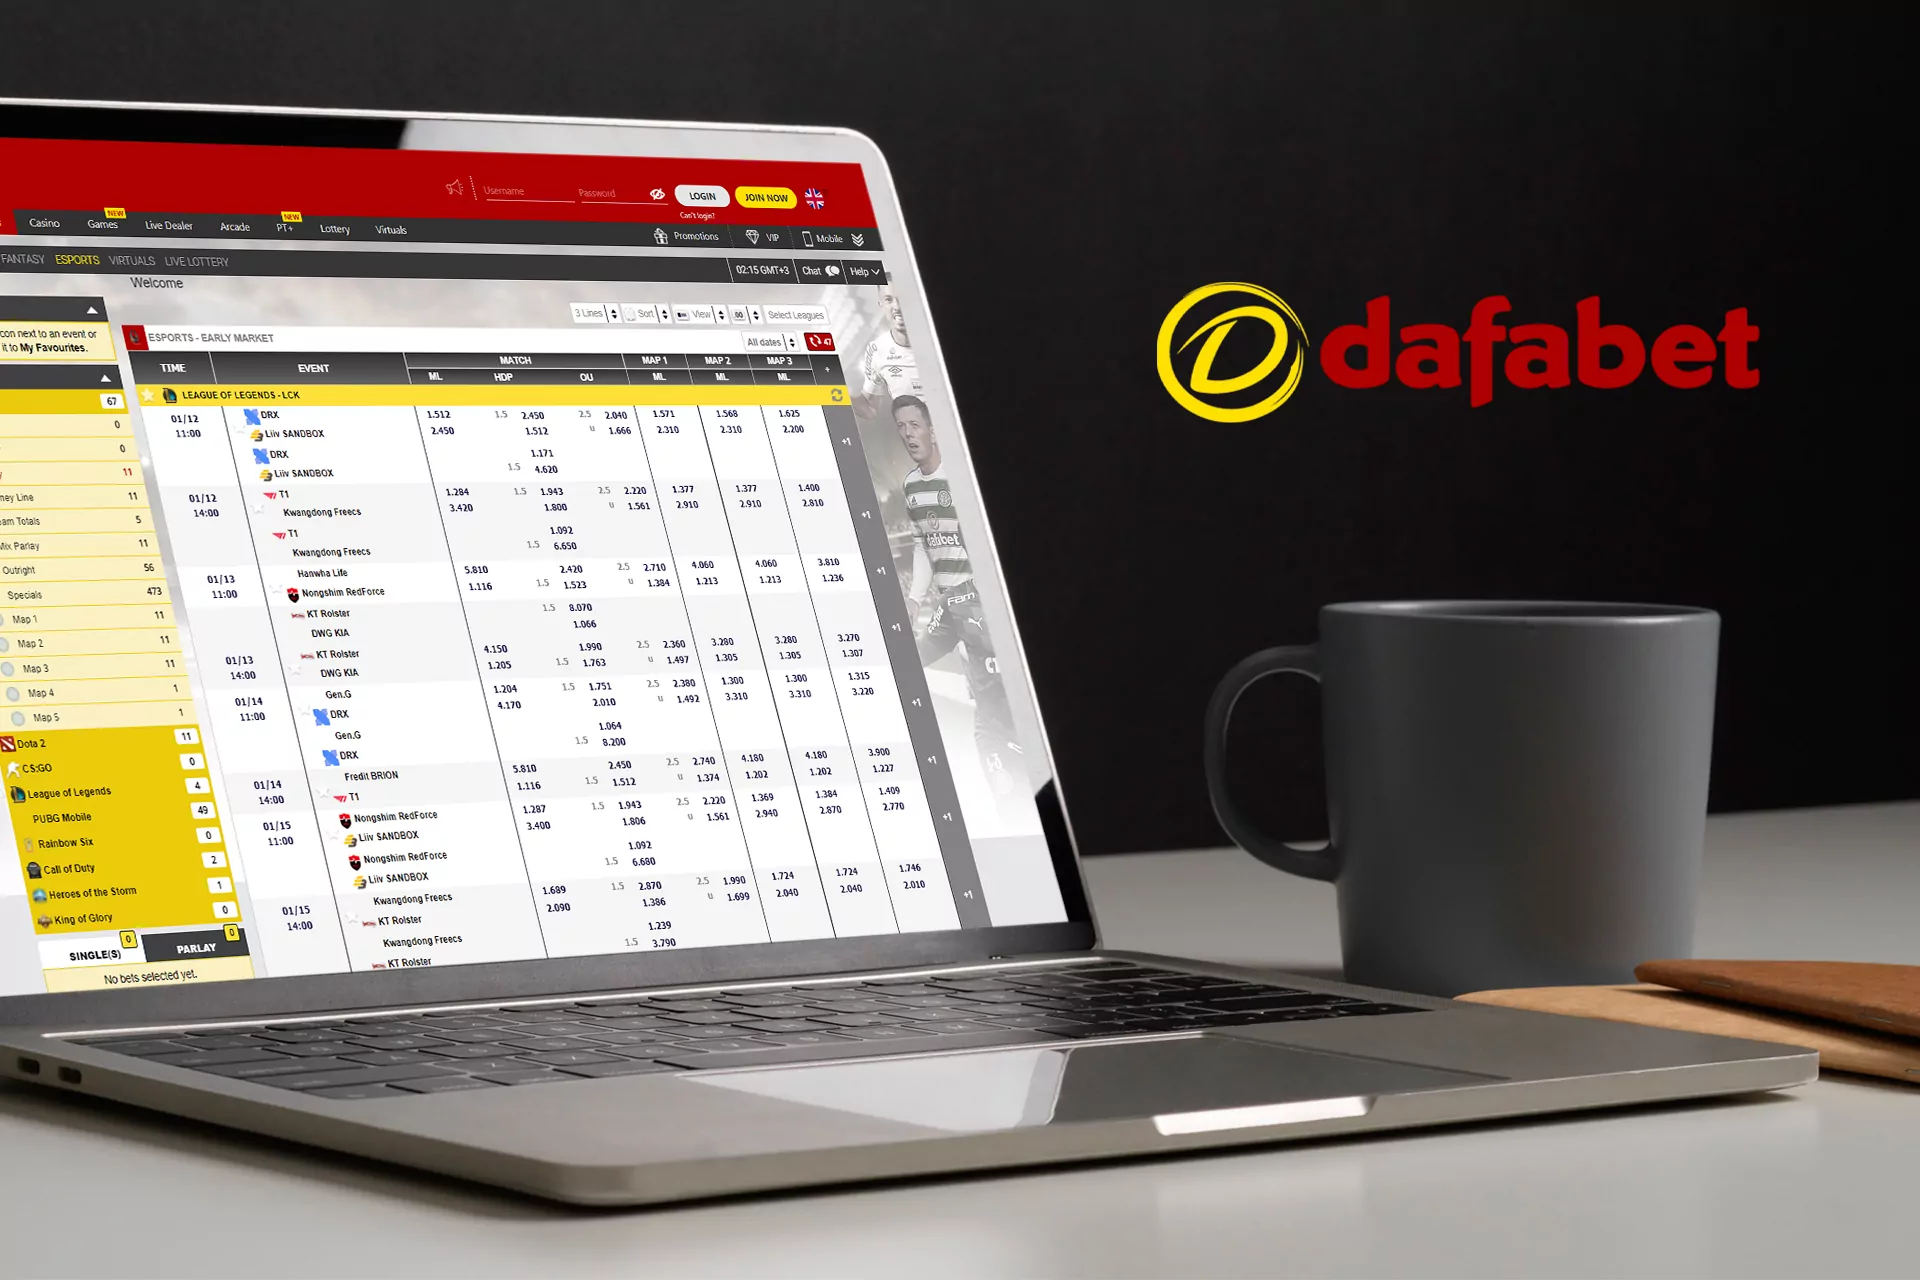 Among Asian betting sites, Dafabet is considered the most reliable and trustworthy one.